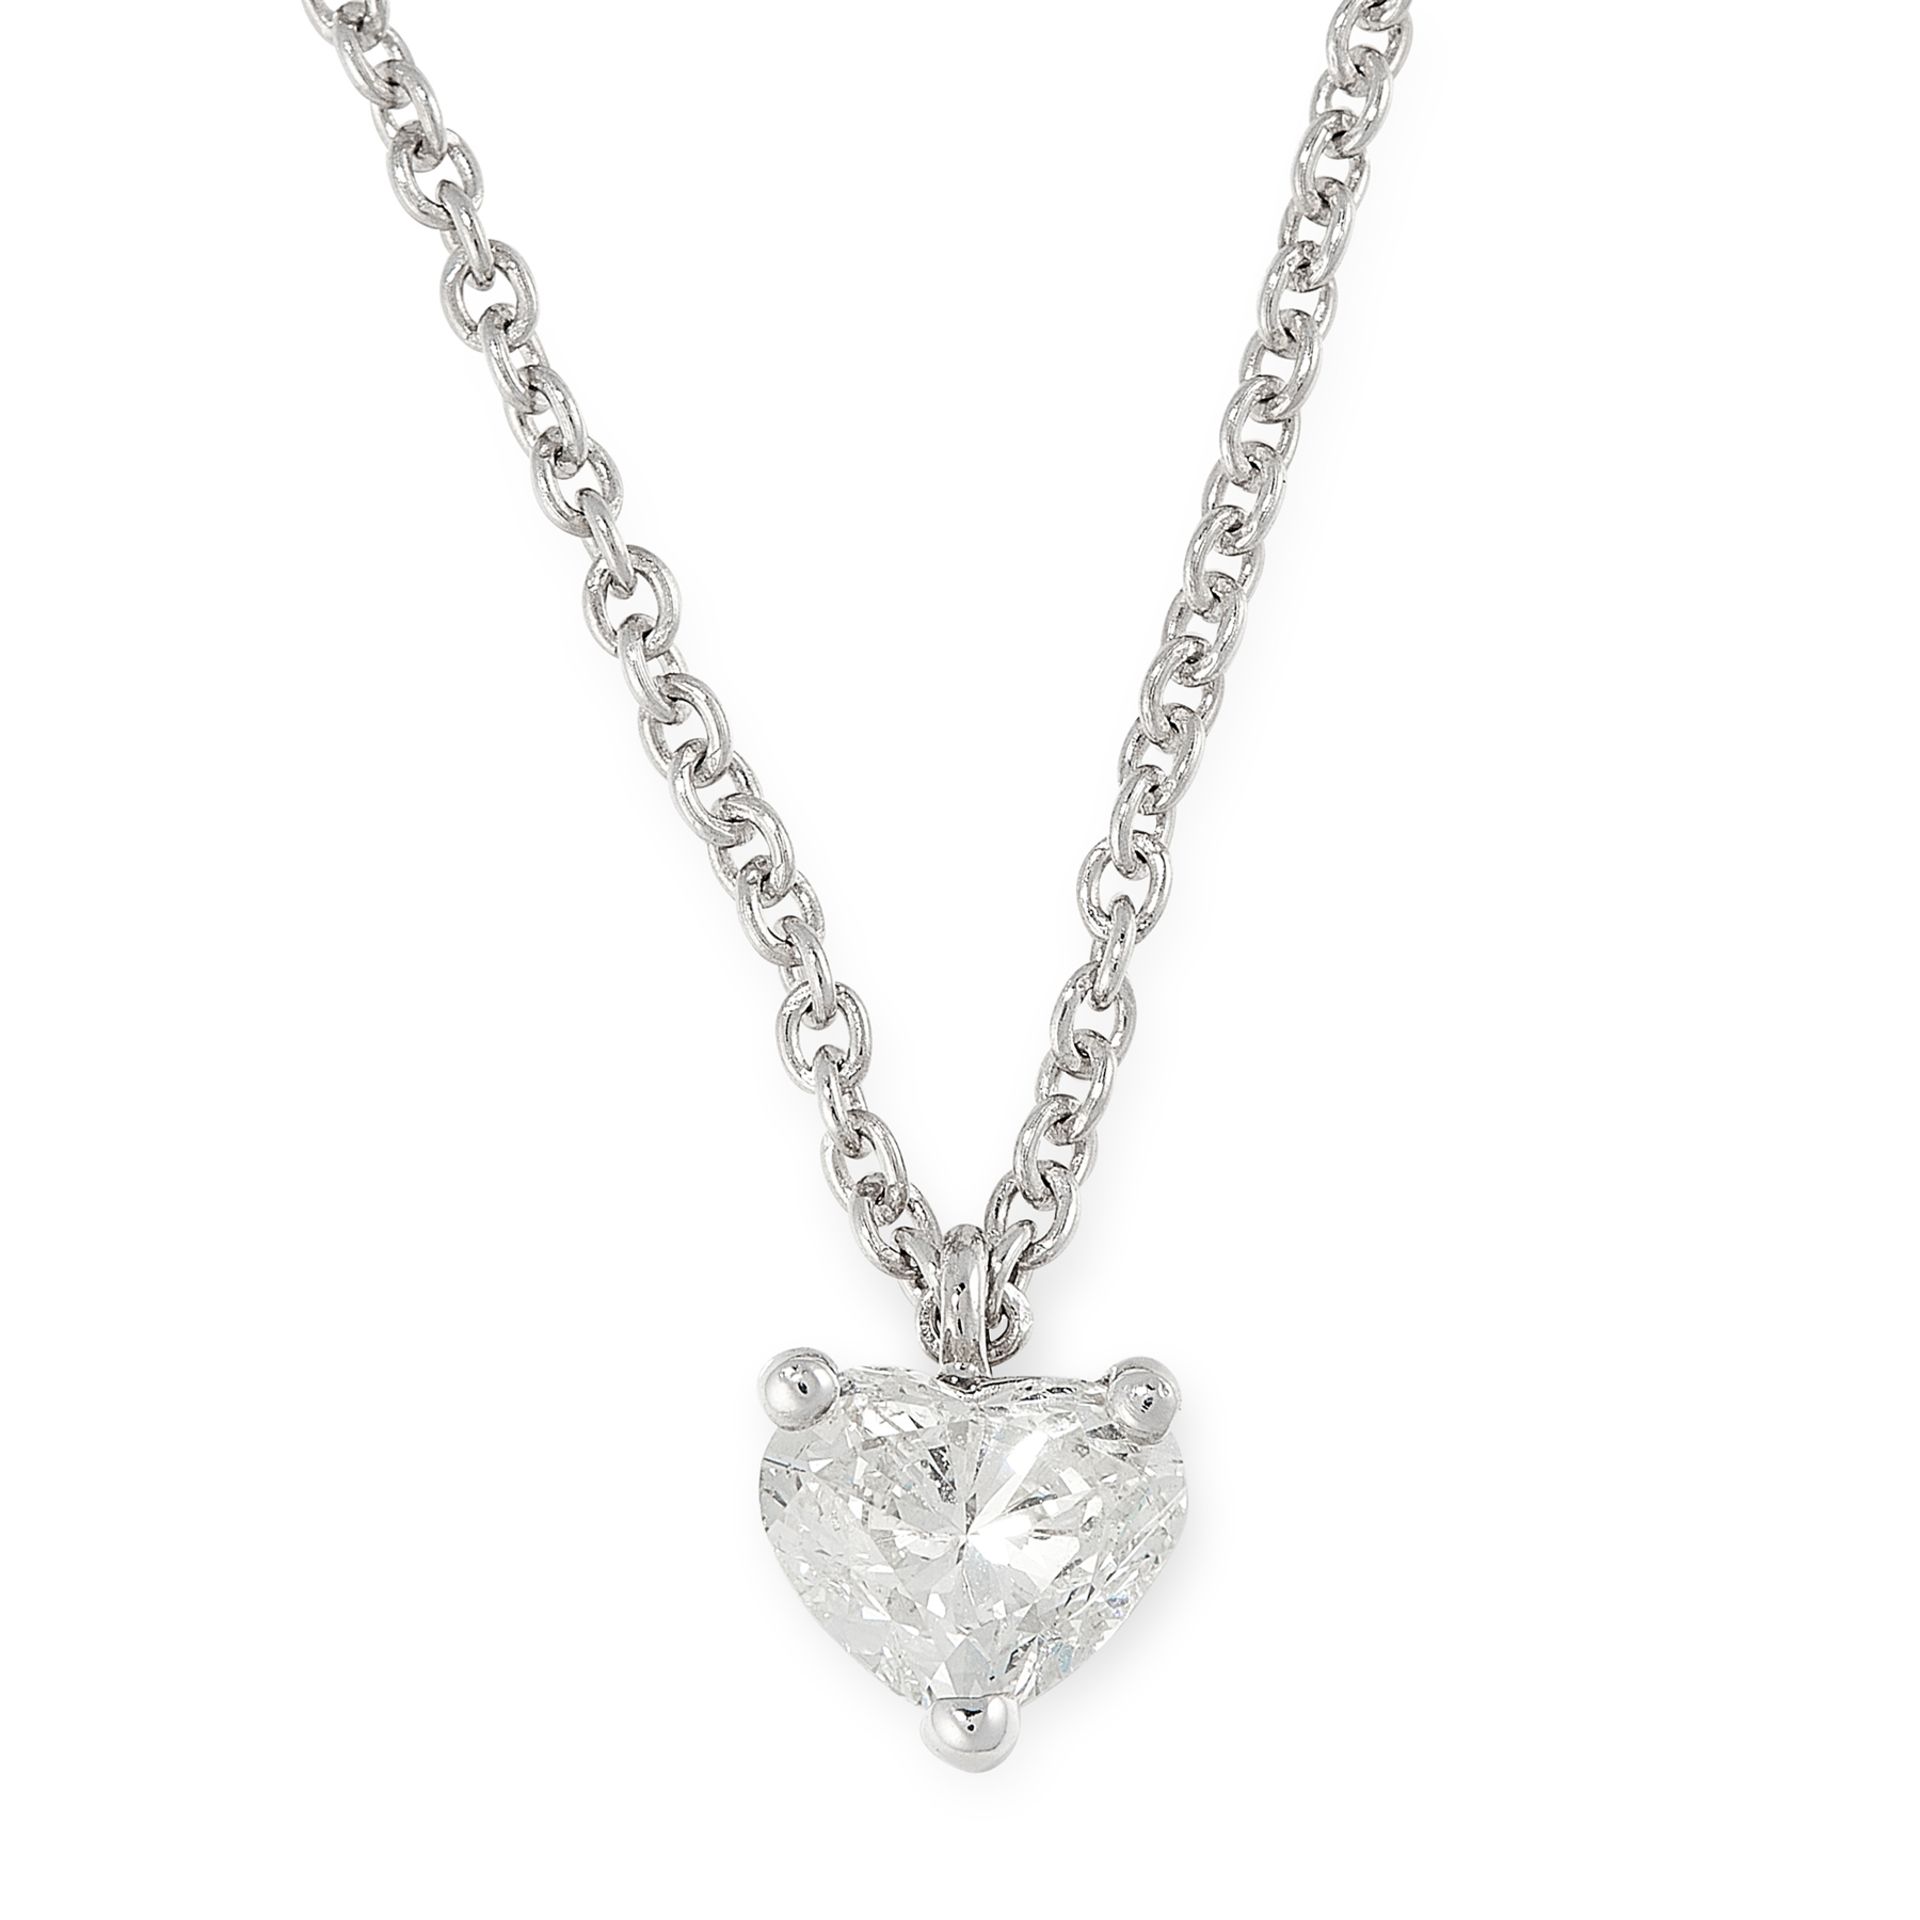 A DIAMOND PENDANT AND CHAIN in 18ct white gold, set with a heart cut diamond of 0.94 carats on a